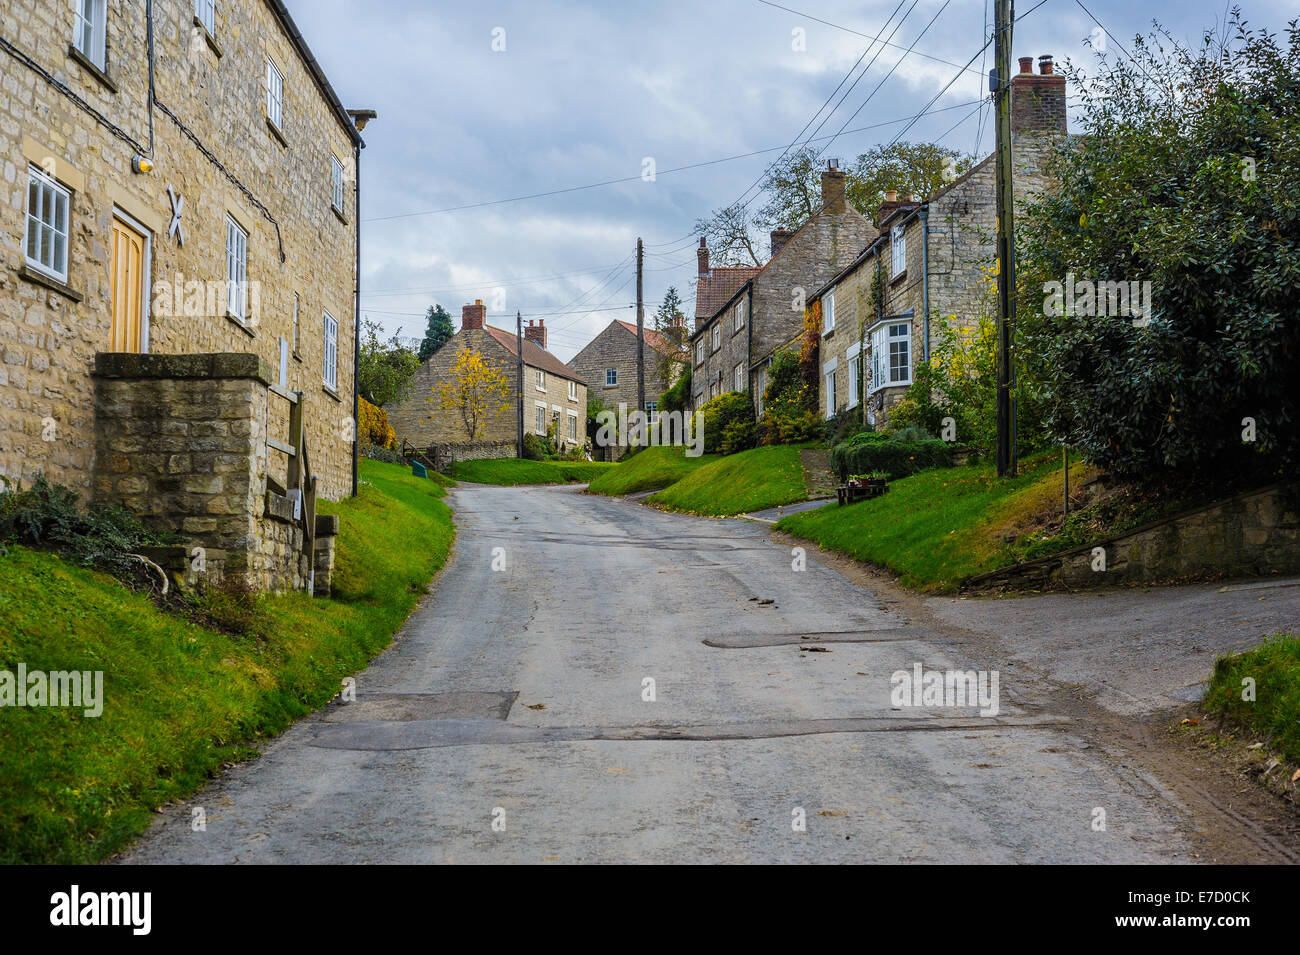 Looking up a narrow lane street road in the charming, rural North Yorkshire village of Nunnington; horizontal landscape format Stock Photo